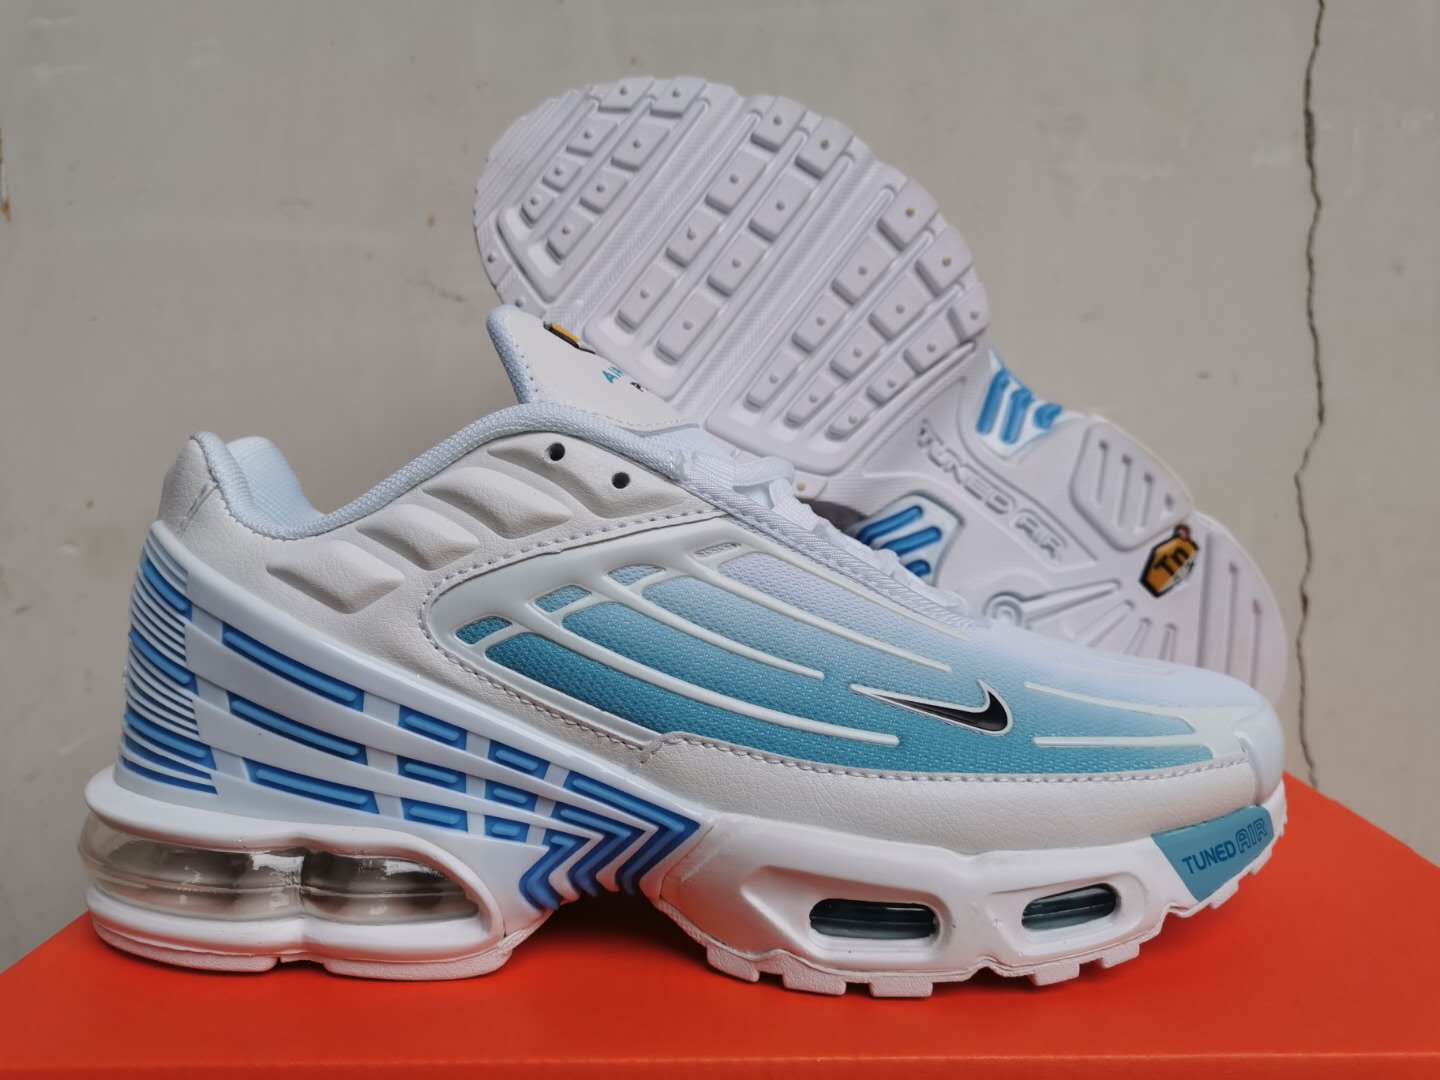 Women's Hot sale Running weapon Air Max TN Shoes 008